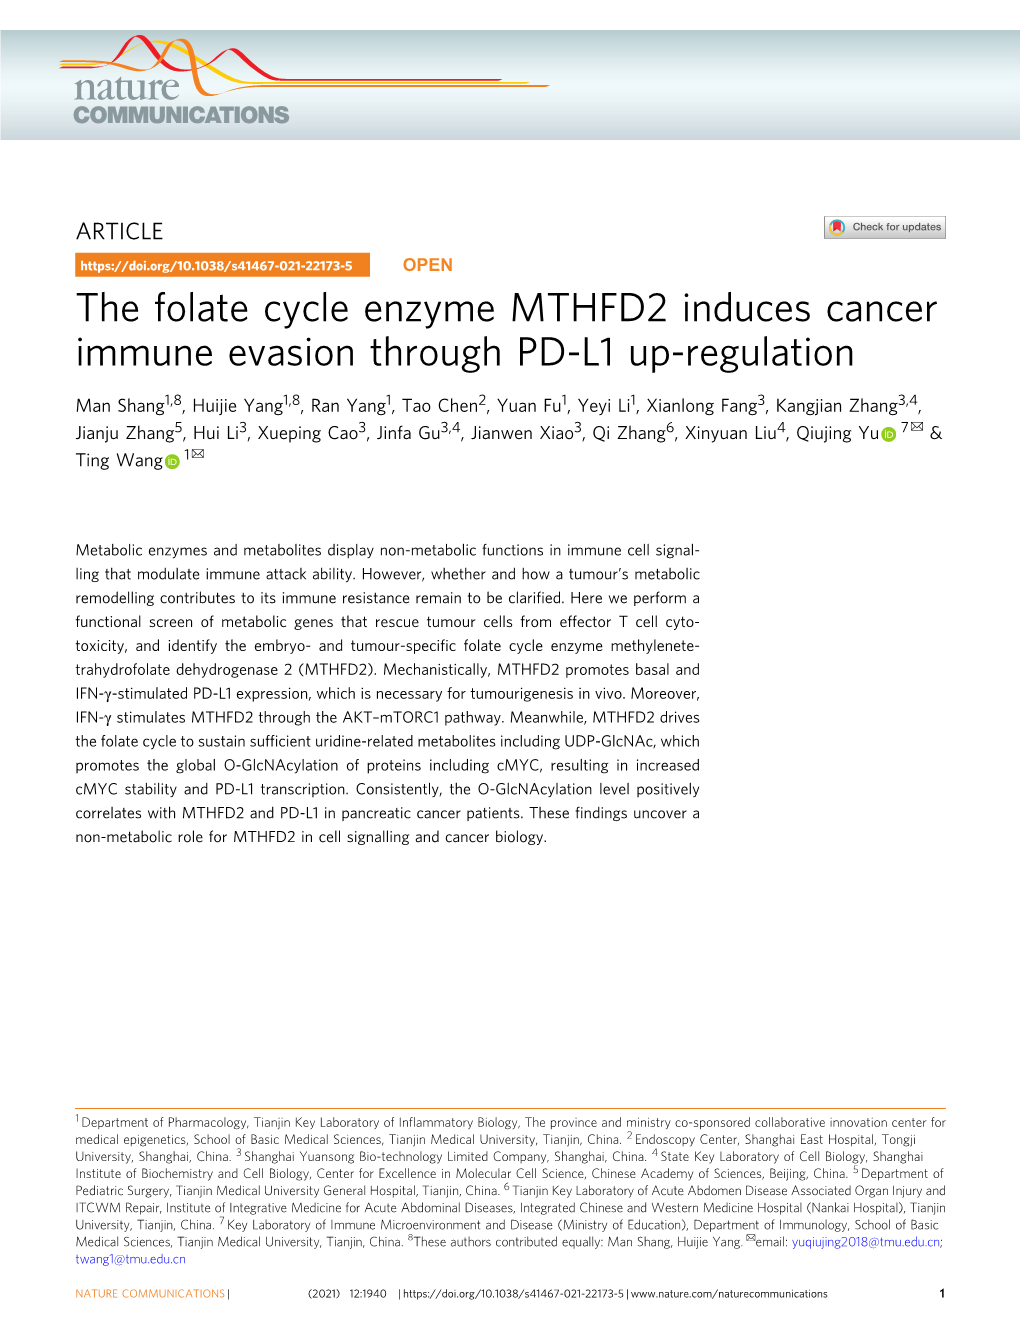 The Folate Cycle Enzyme MTHFD2 Induces Cancer Immune Evasion Through PD-L1 Up-Regulation